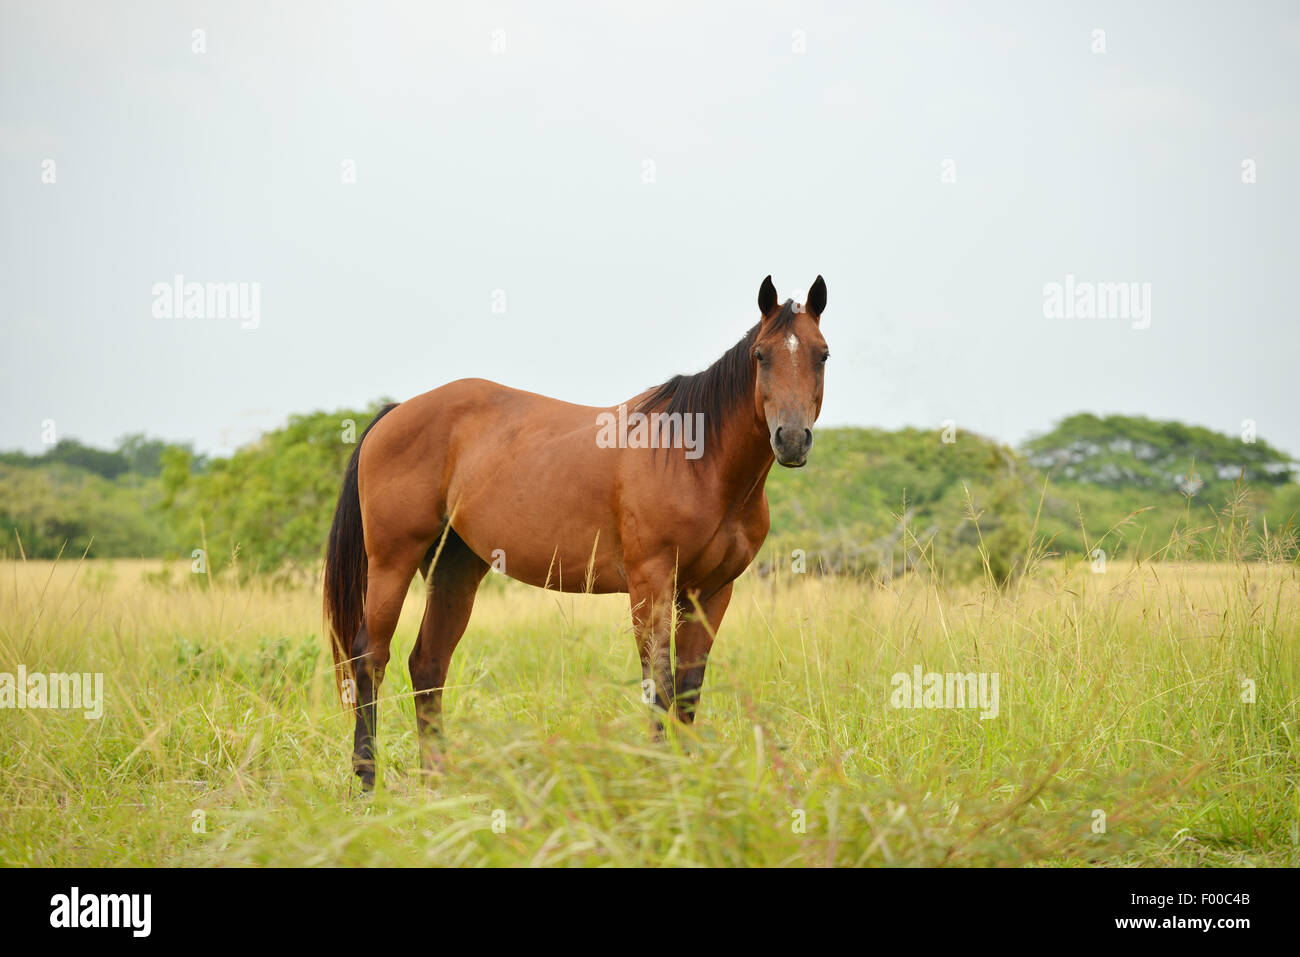 Quarter horse stallion standing in a field with tall grass Stock Photo